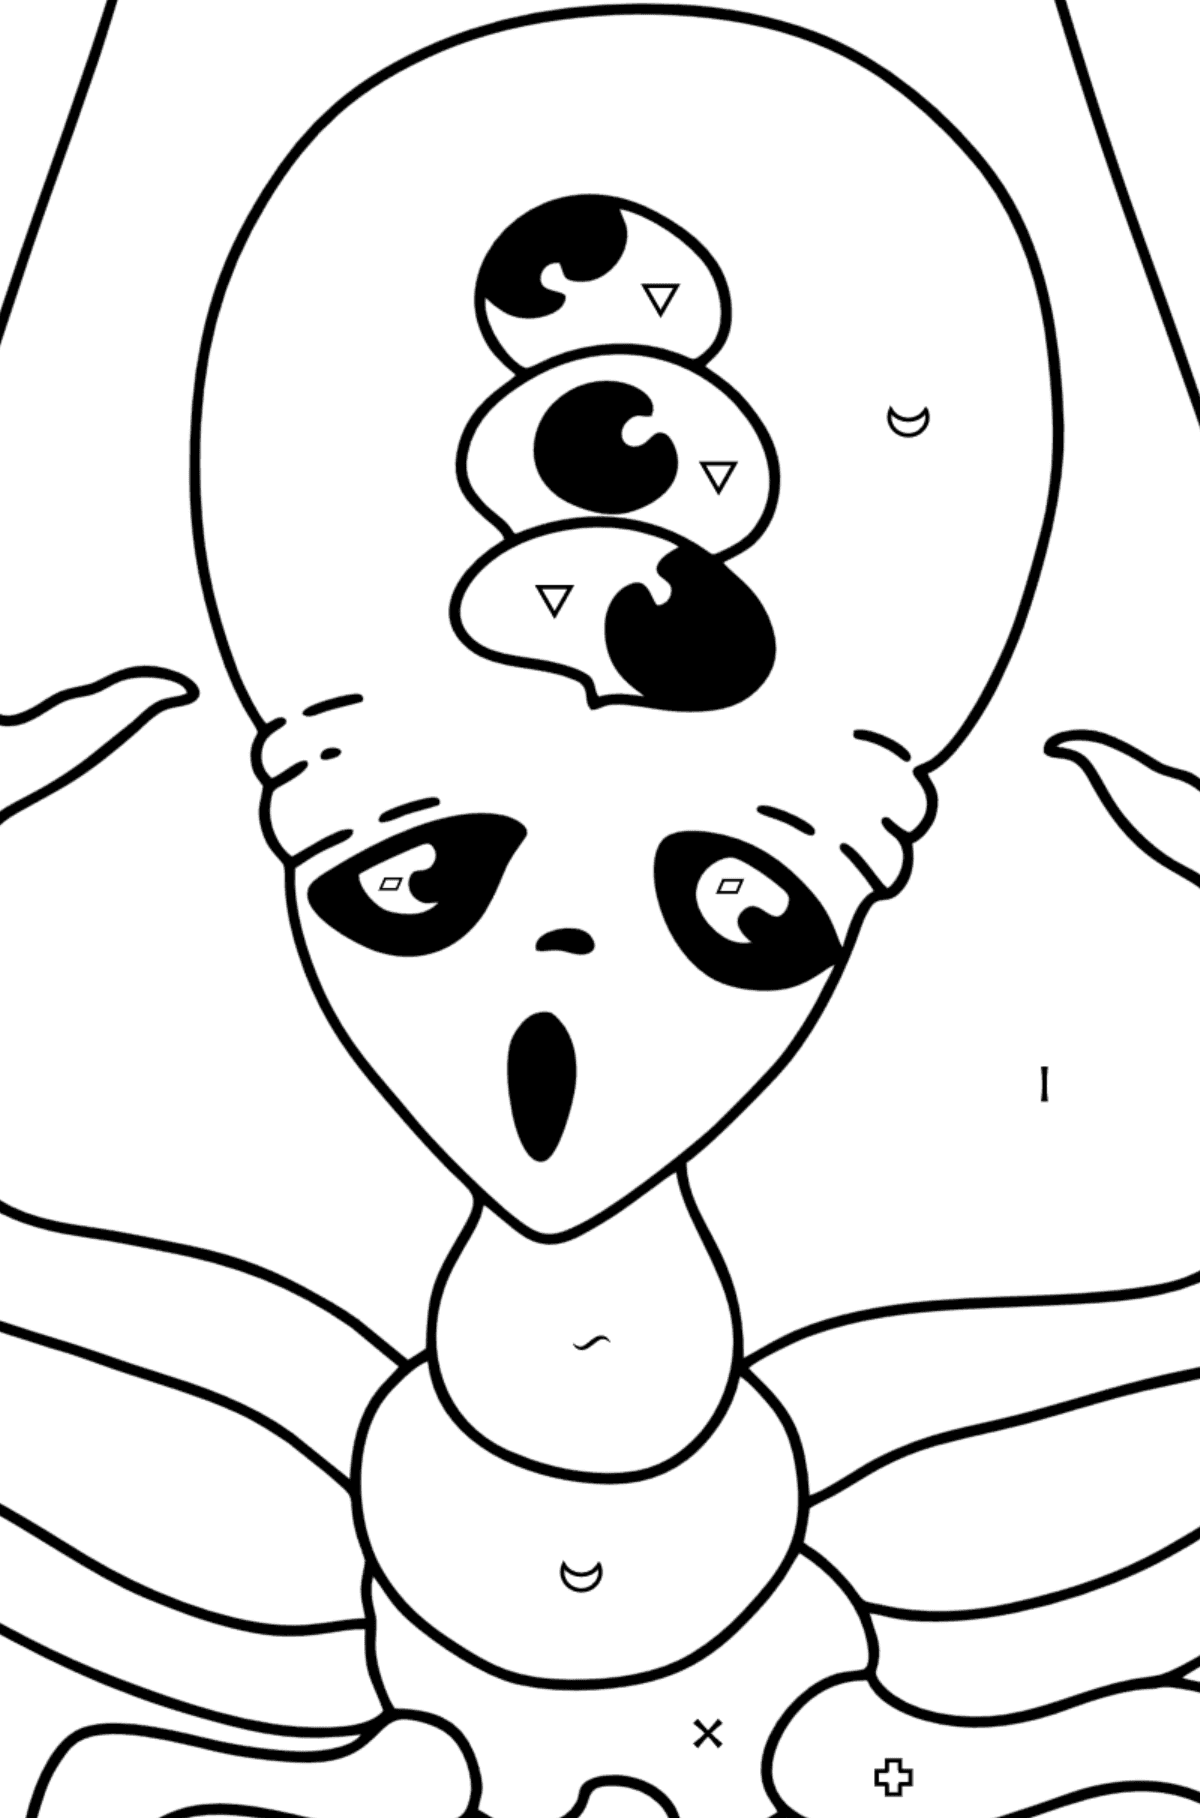 Scary Alien Coloring page - Coloring by Symbols and Geometric Shapes for Kids